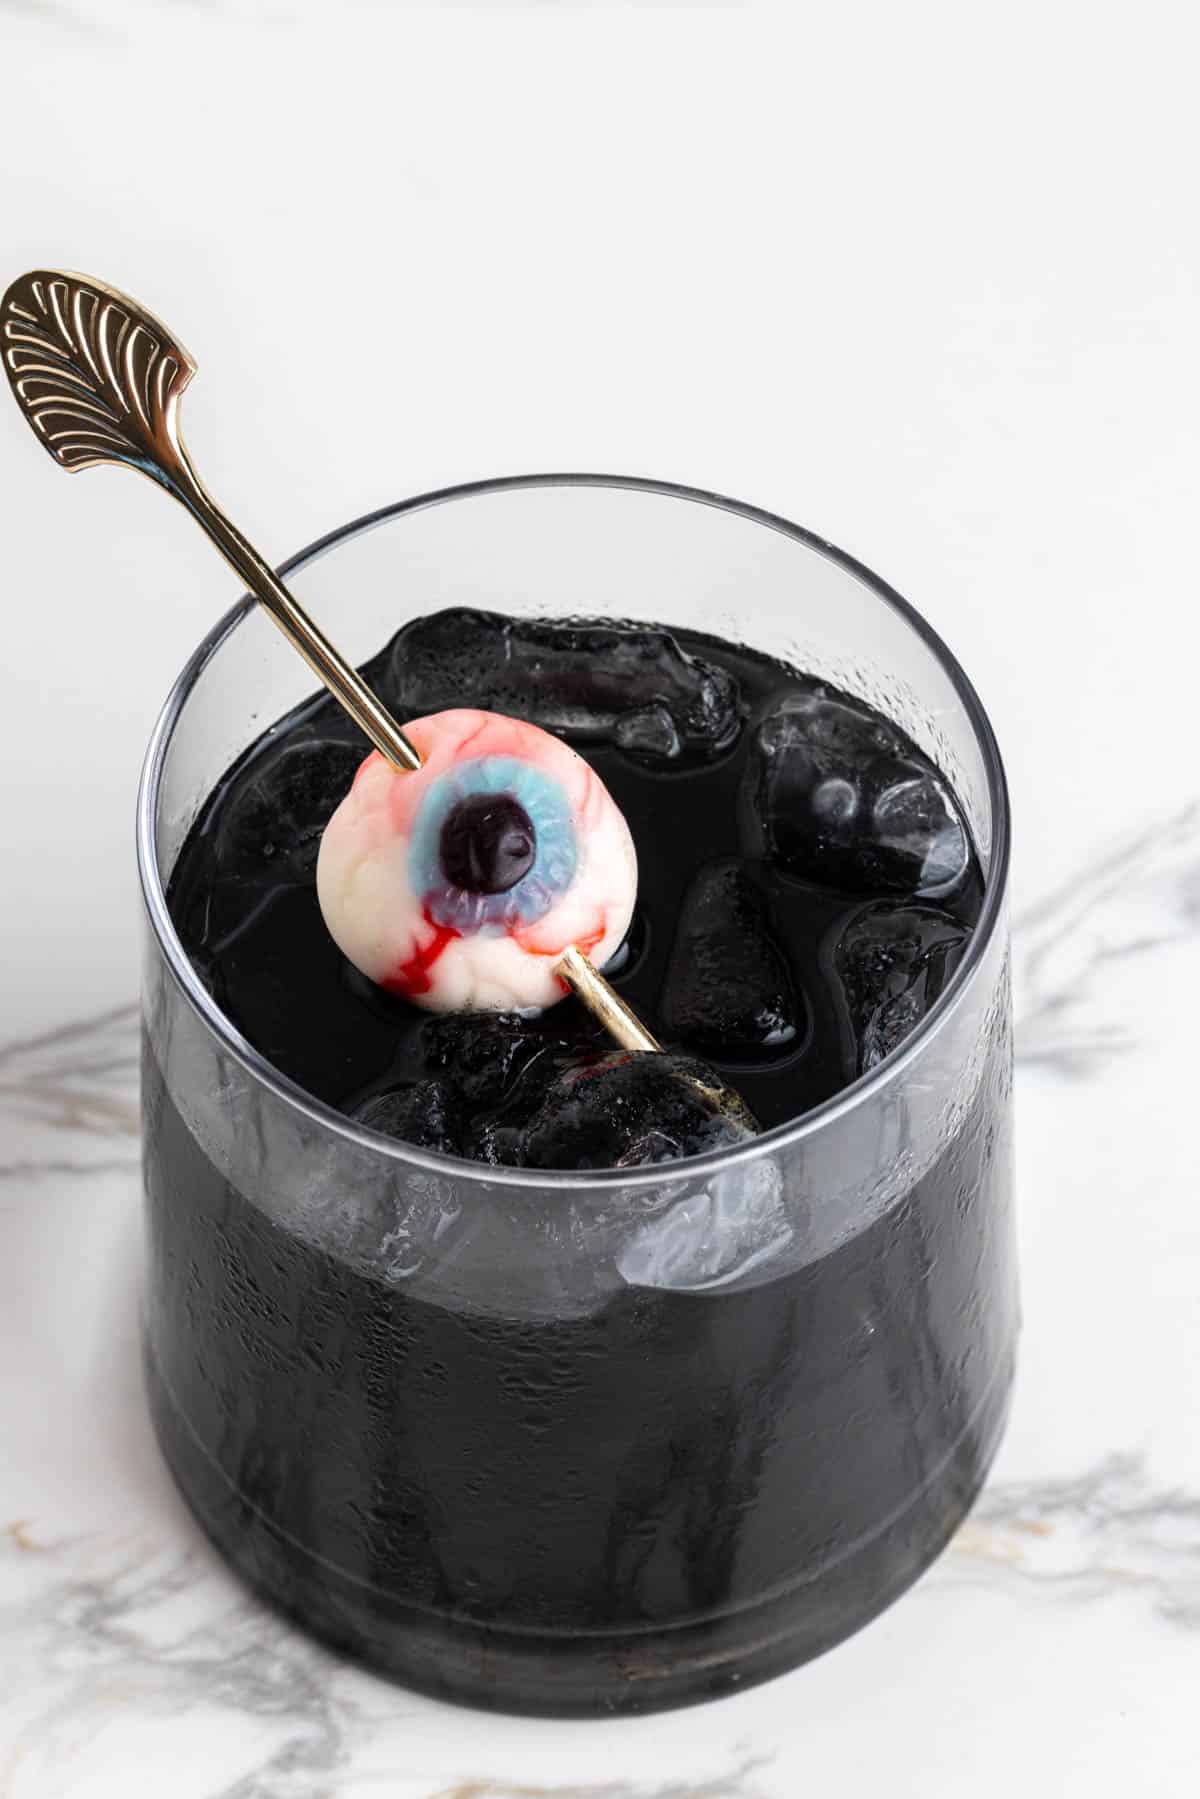 A close up of a black cocktail with a gummy eyeball garnish for Halloween.